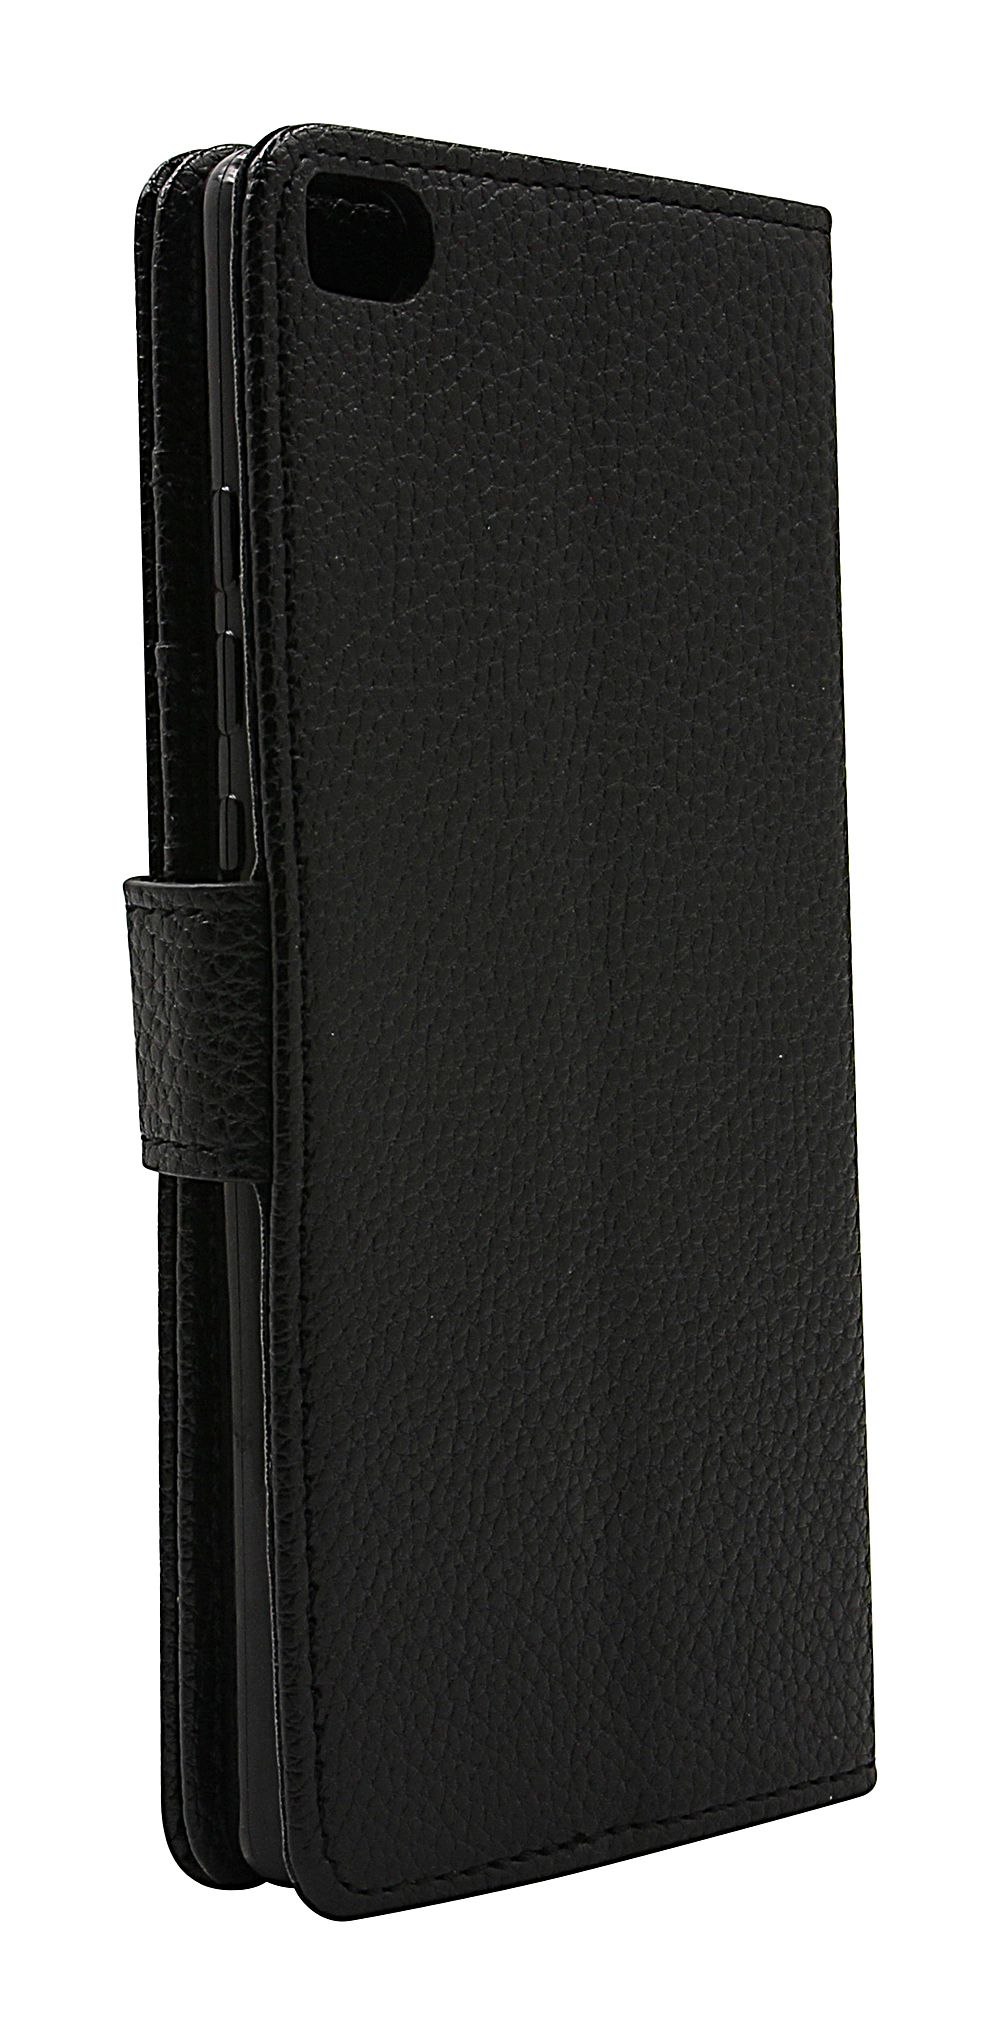 New Standcase Wallet Huawei P8